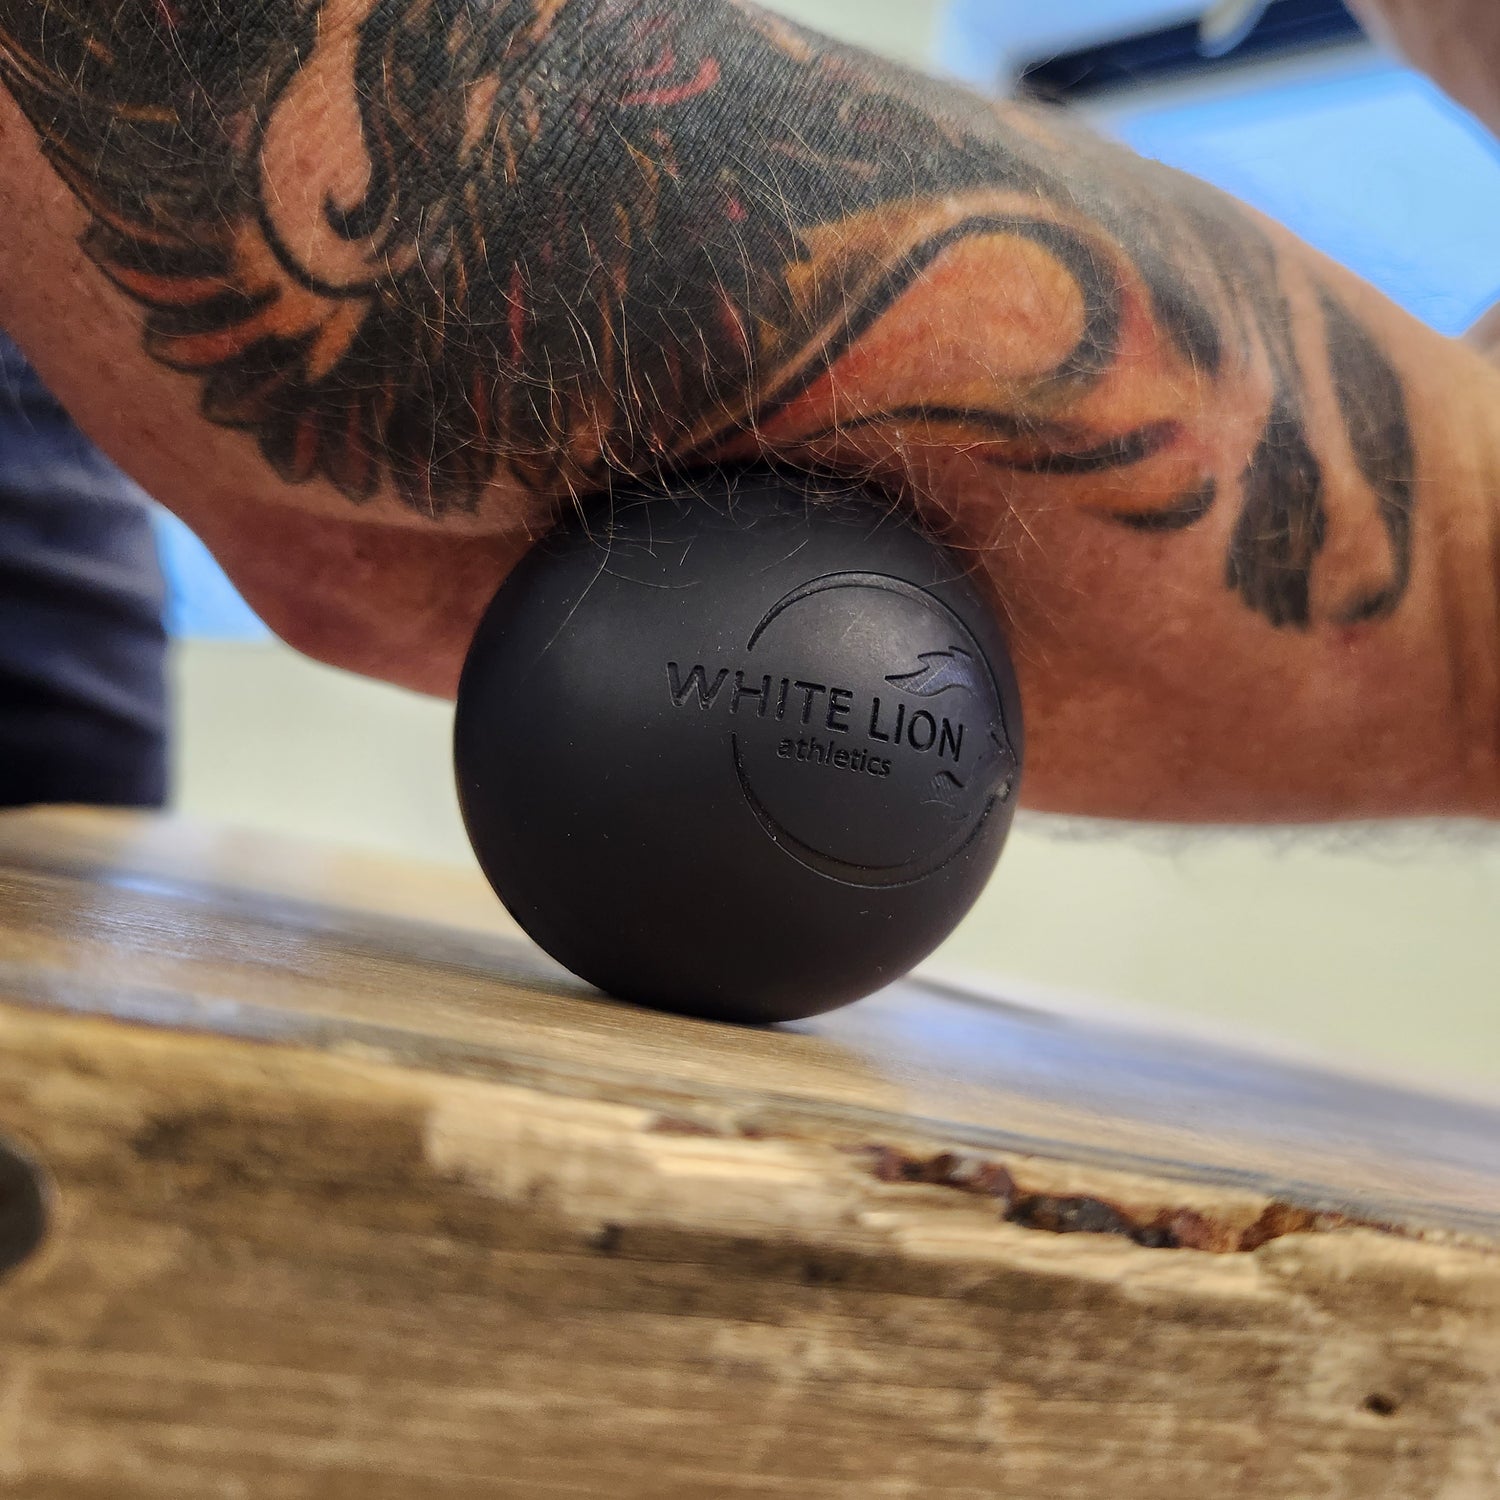 Lacrosse ball being used on forearm for self-massage 